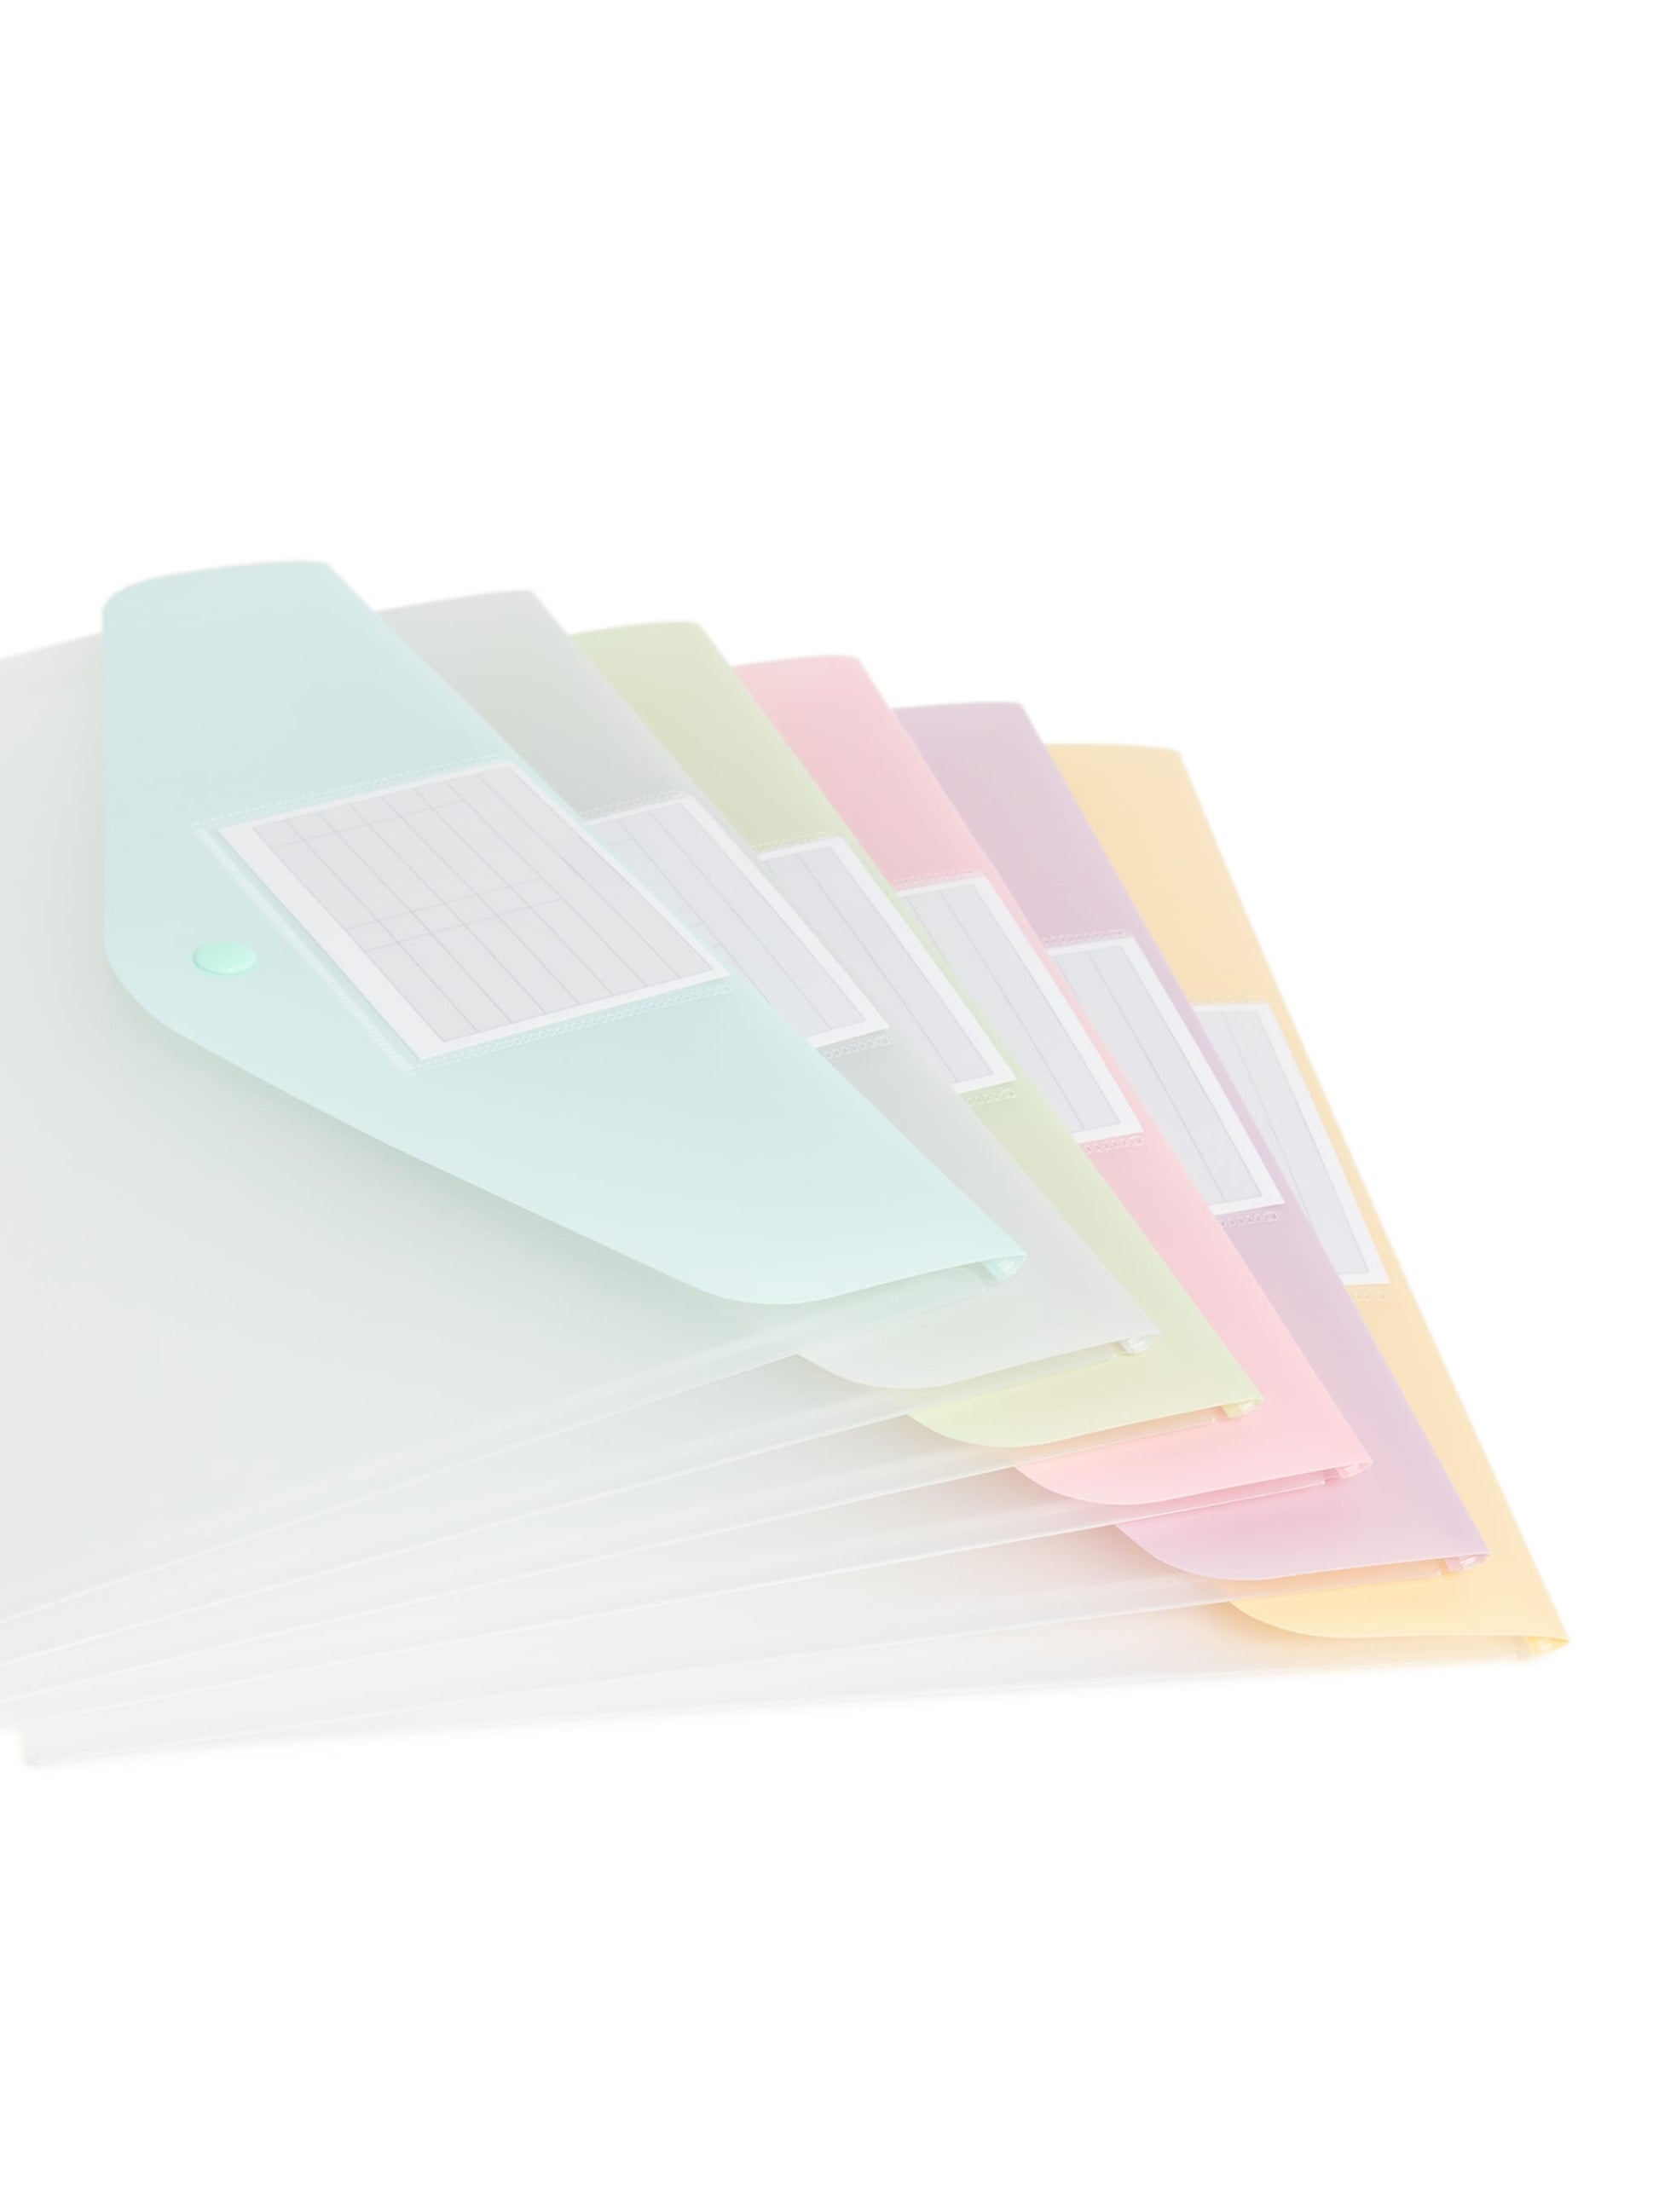 Document Holders, Assorted Colors Color, Letter Size, Set of 1, 086486896887